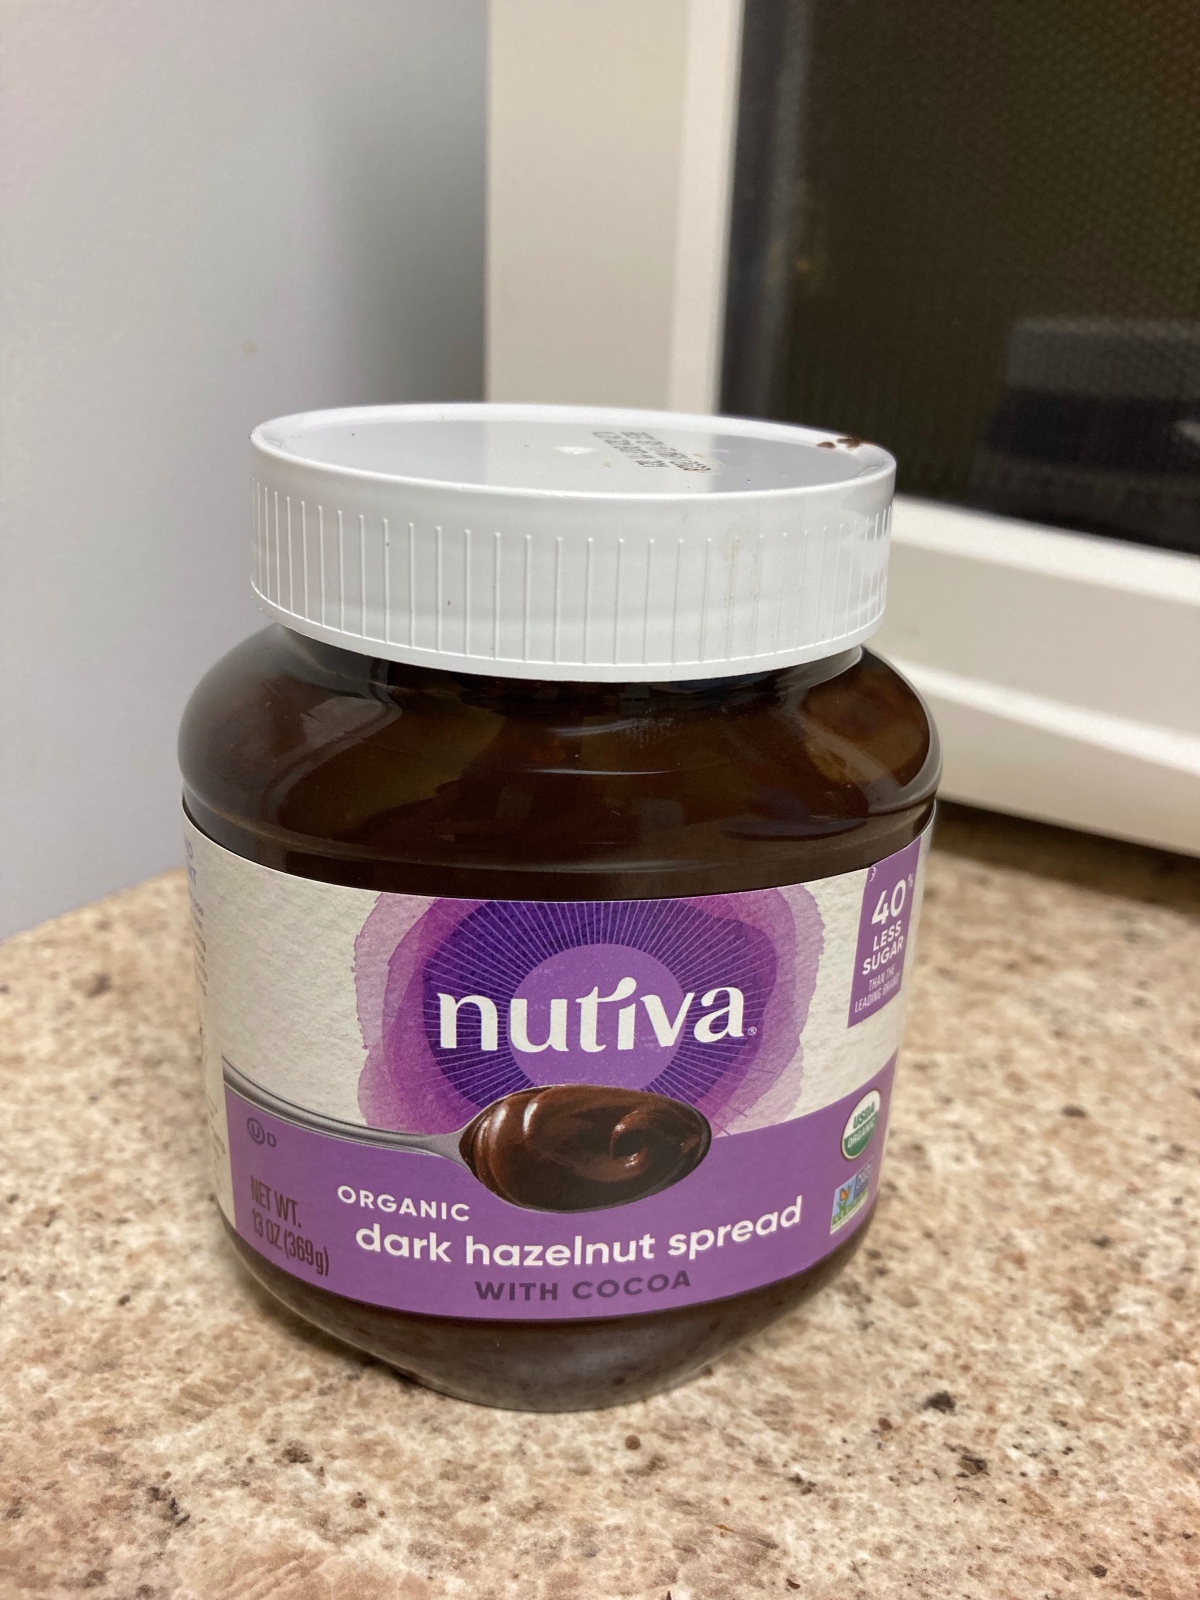 Facts and uses of Nutiva